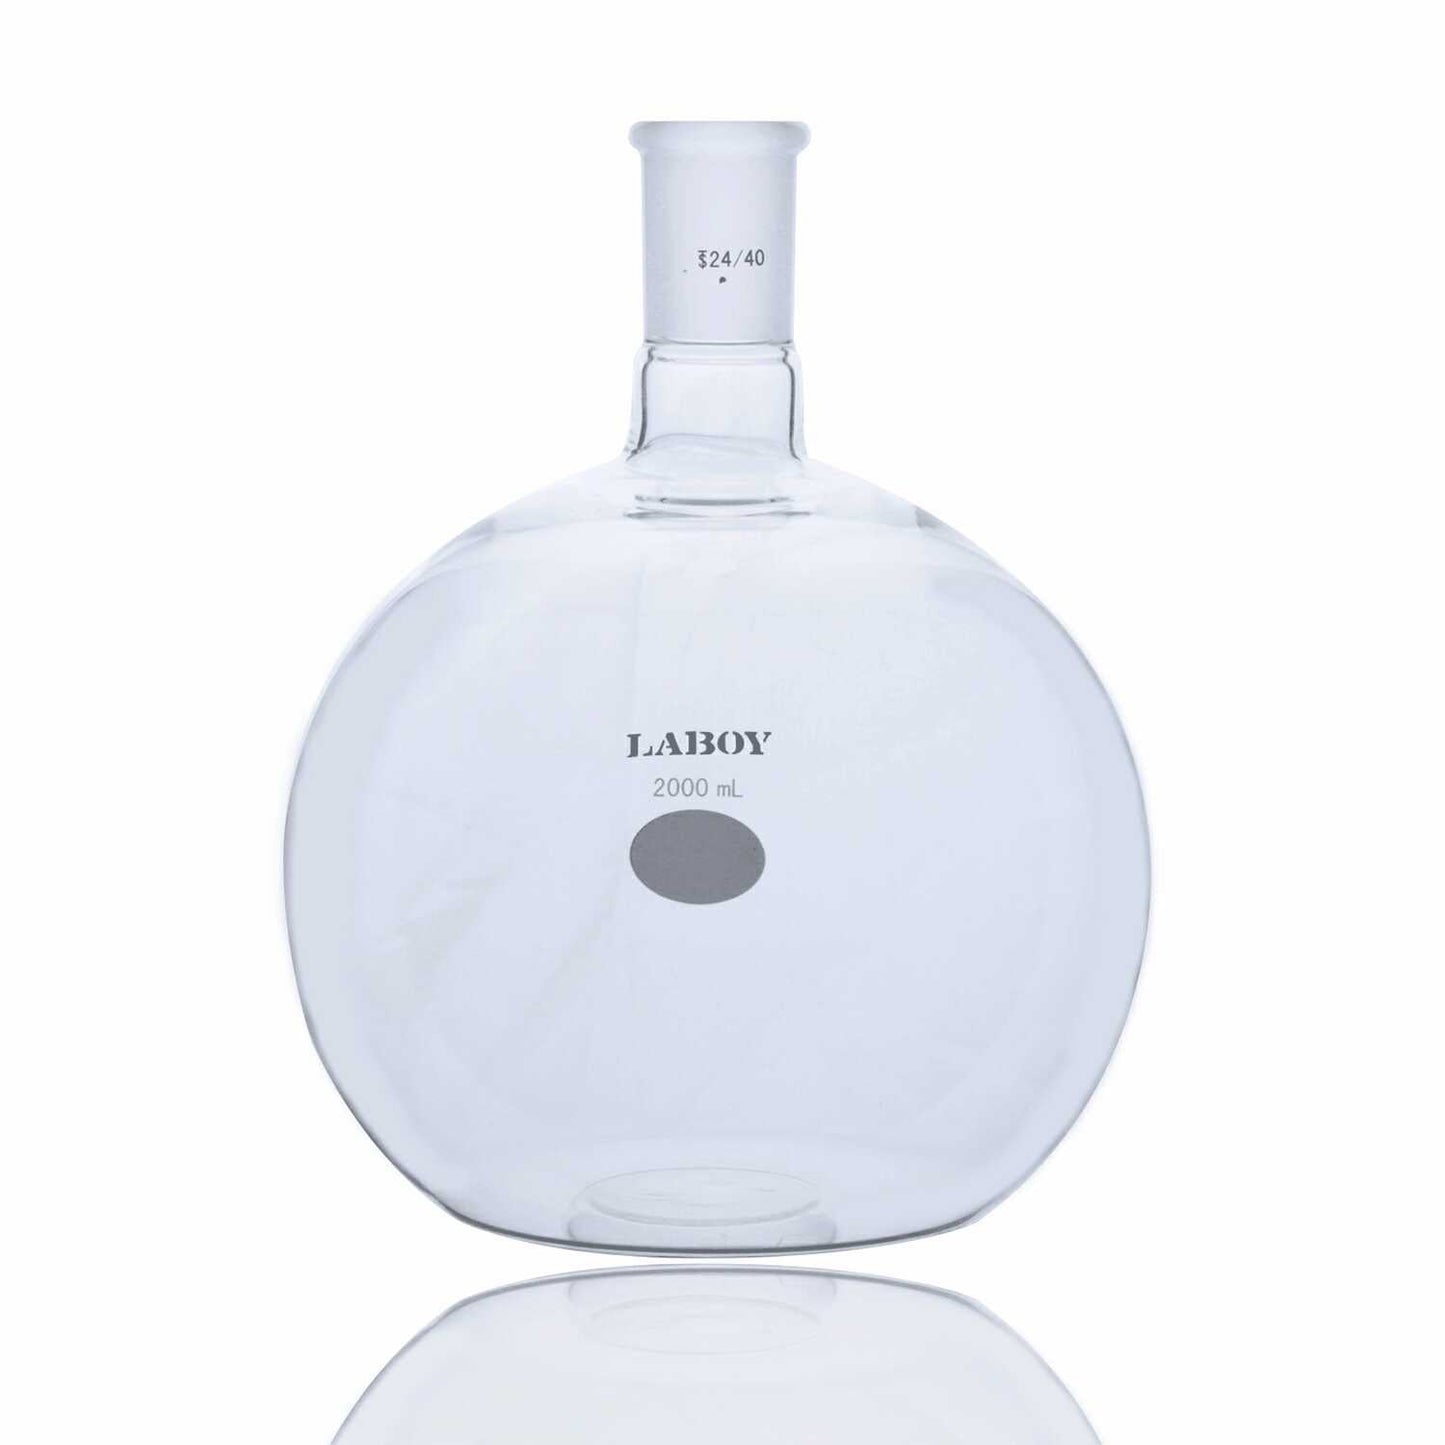 Glass Flat Bottom Boiling Flask Single Neck With Standard Taper Joint - Scienmart